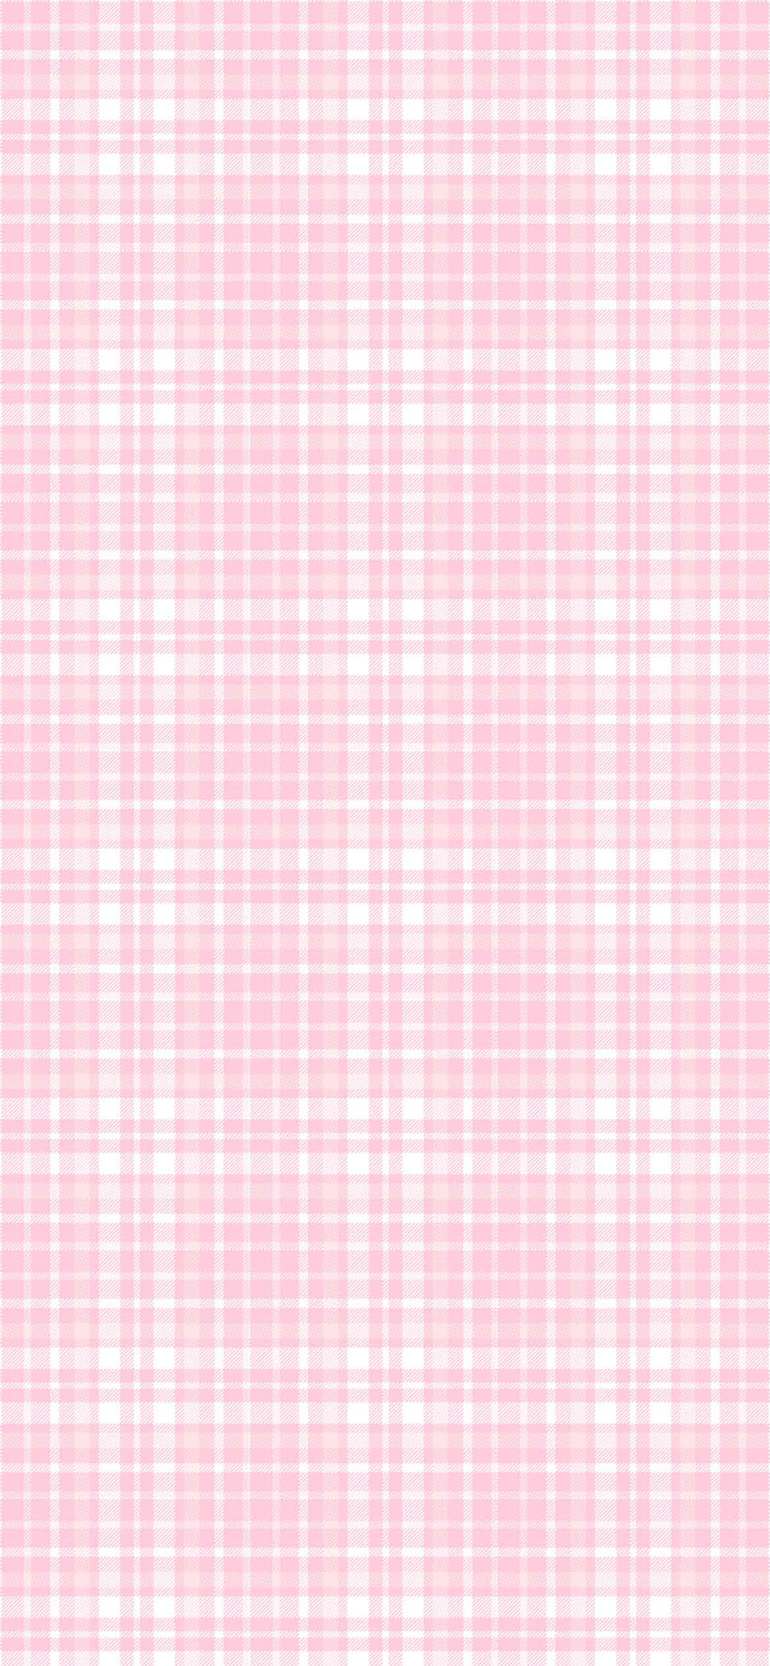 Pink Aesthetic Picture : Pink Plaid Wallpaper